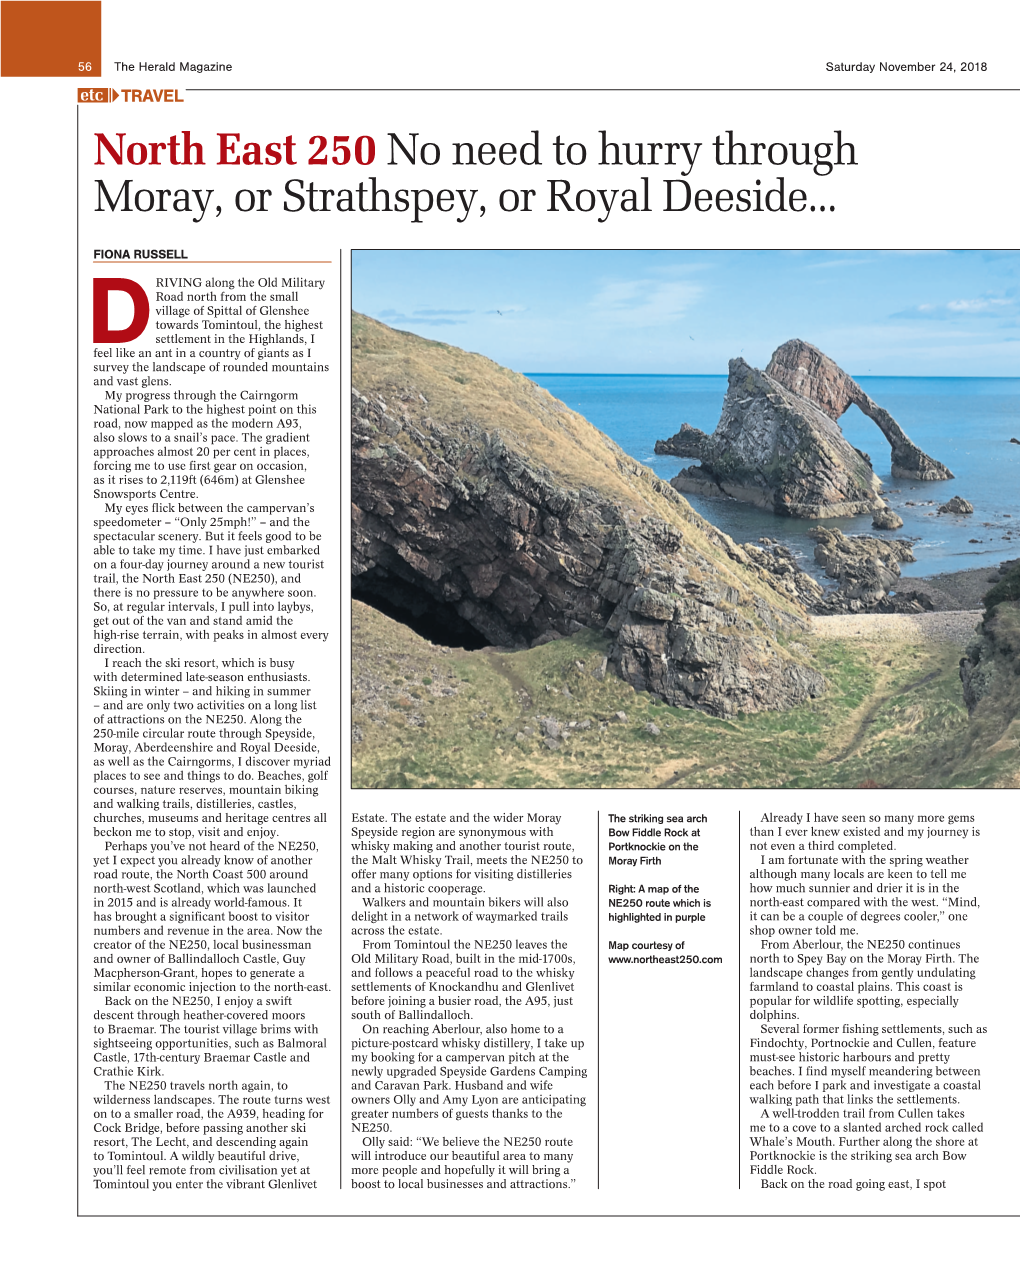 North East 250 No Need to Hurry Through Moray, Or Strathspey, Or Royal Deeside